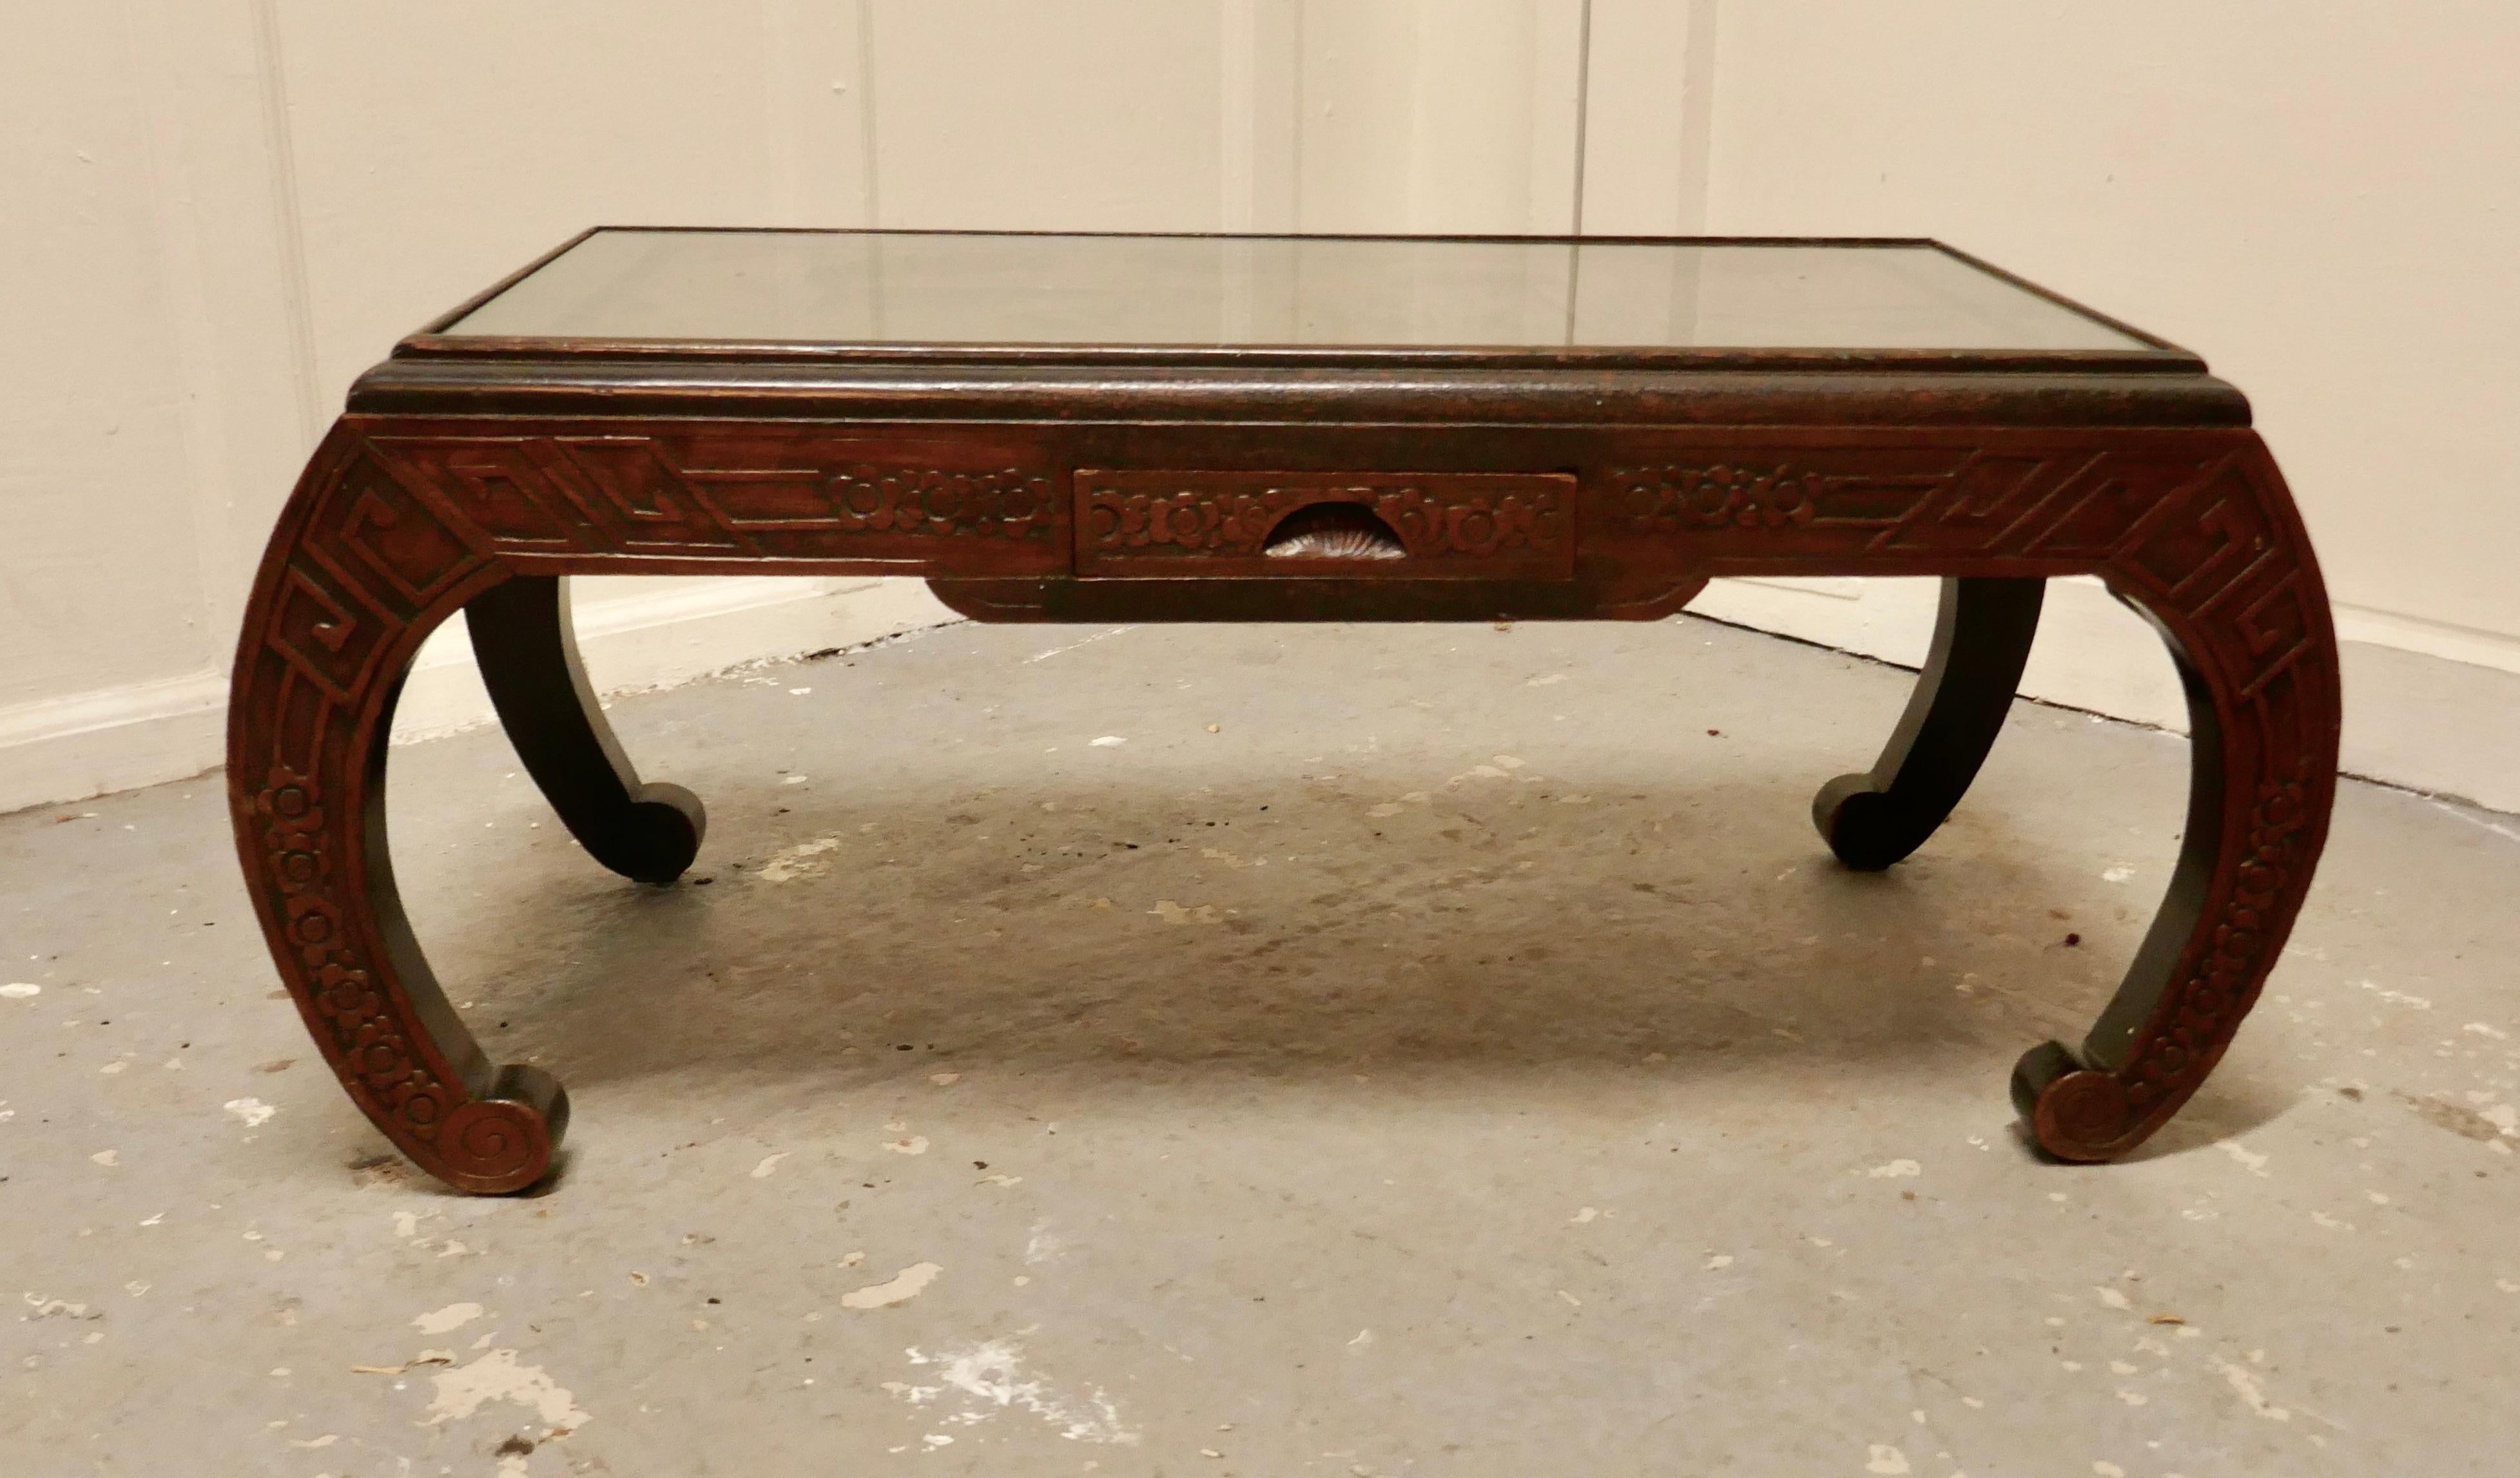 Oriental deeply carved low table, coffee table

This is a very attractive piece, the table is in the style of an opium table, it has a two tone lacquer finish accentuating the detail of the carving
The table top has superb patina and an inset